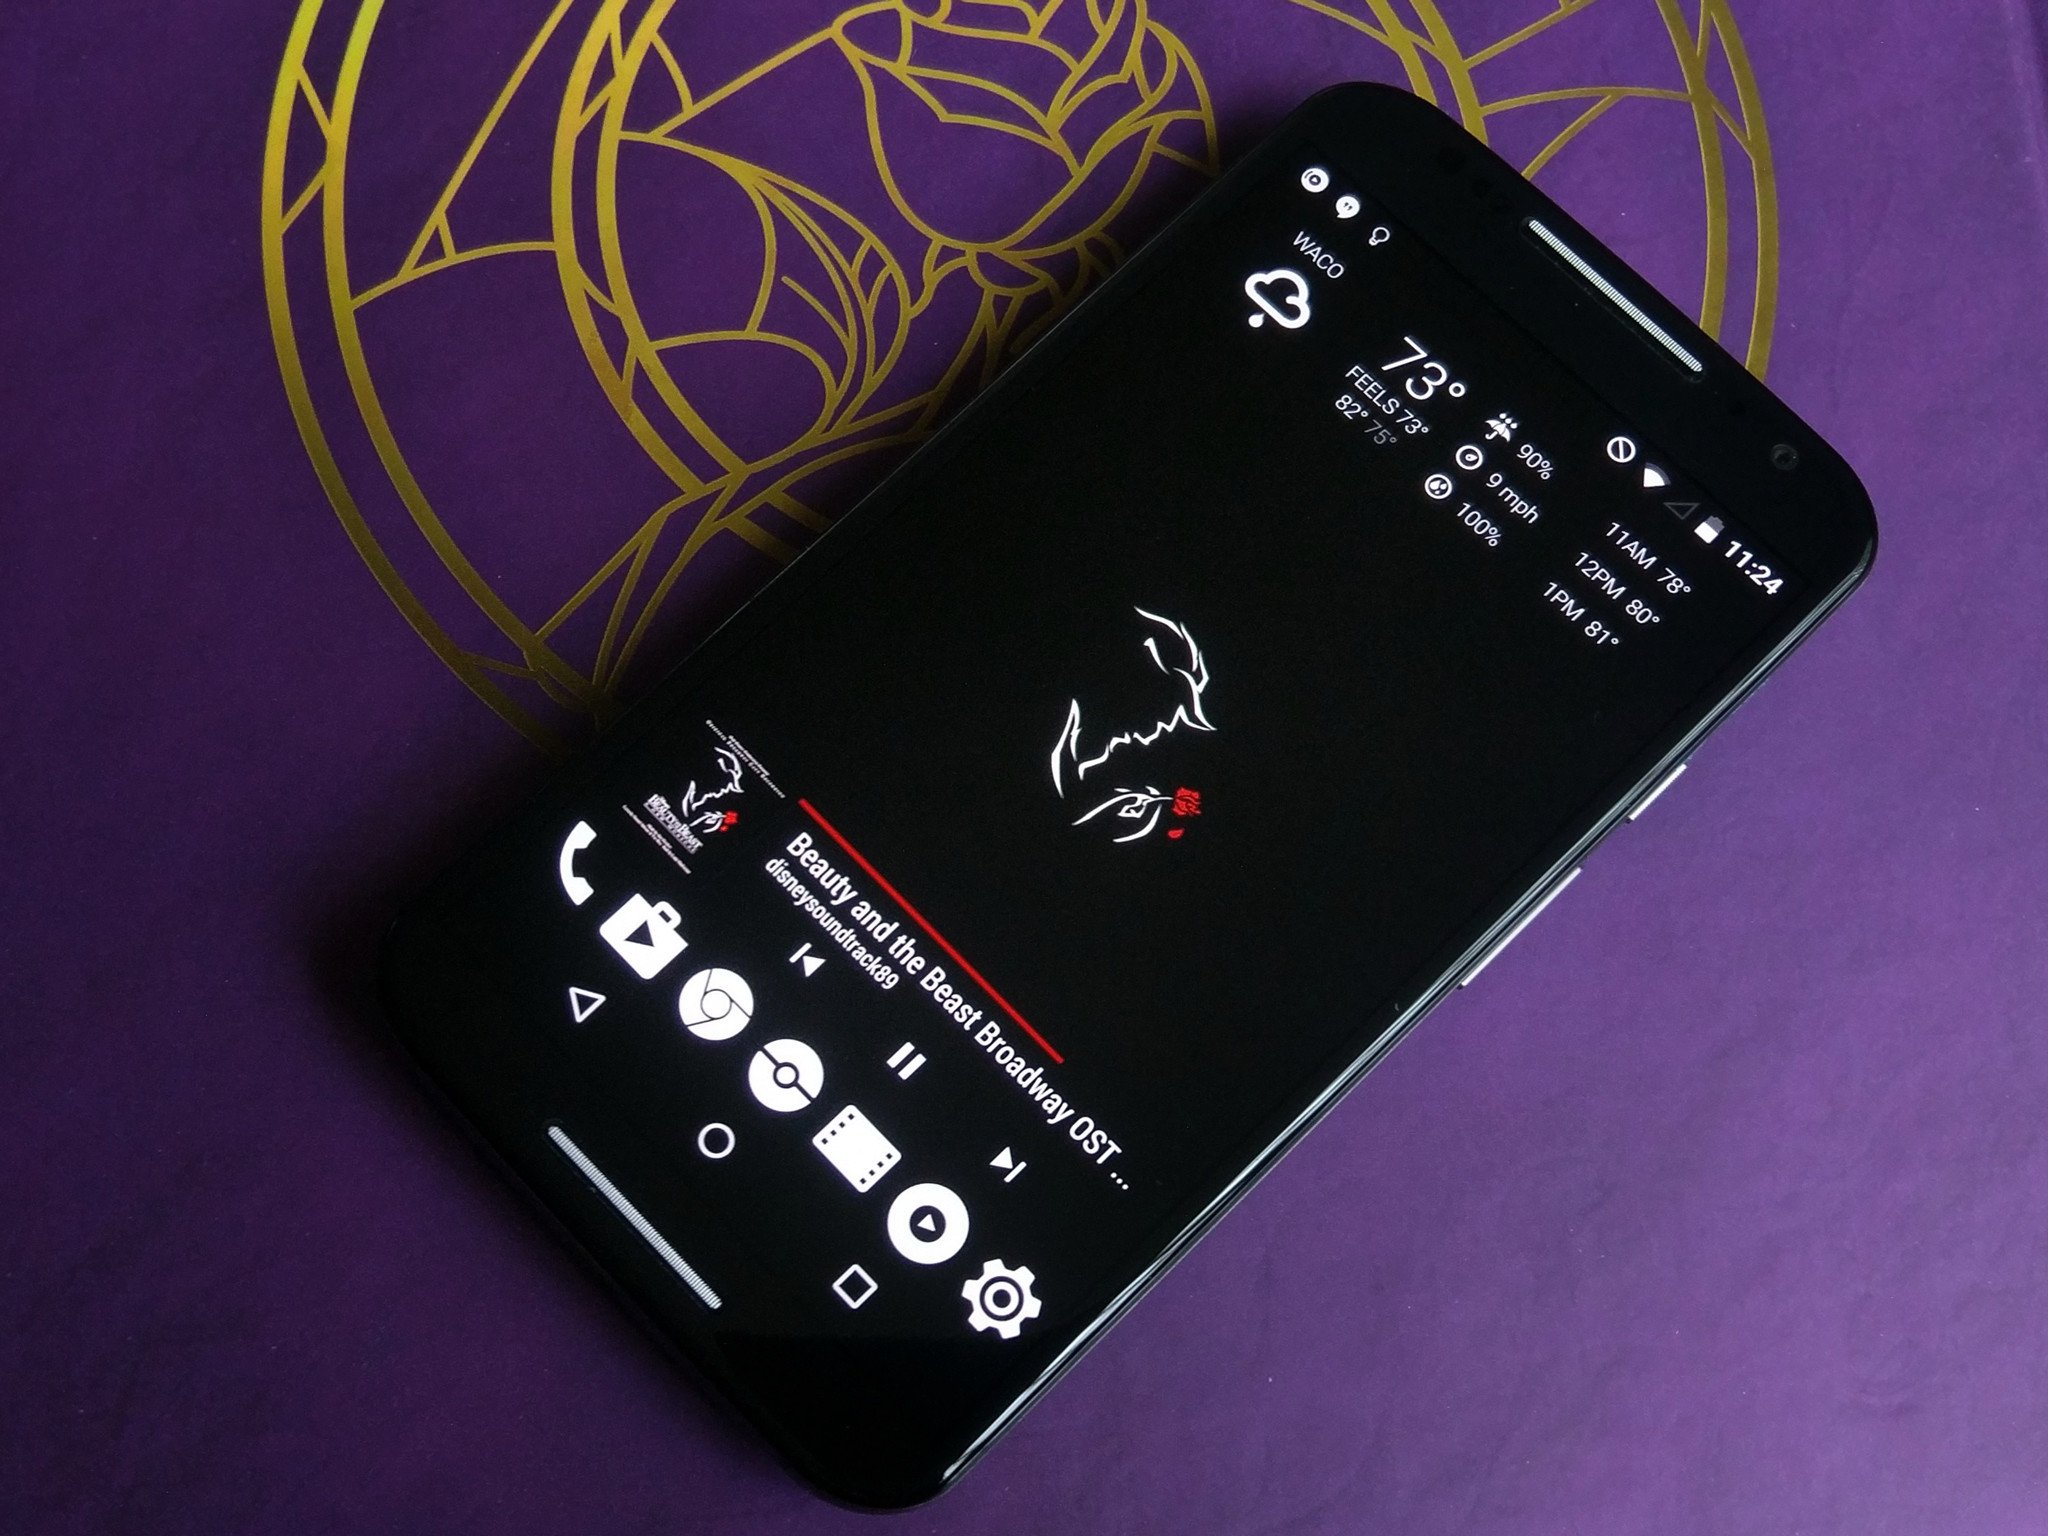 Join the Dark Side with these awesome AMOLED-friendly 